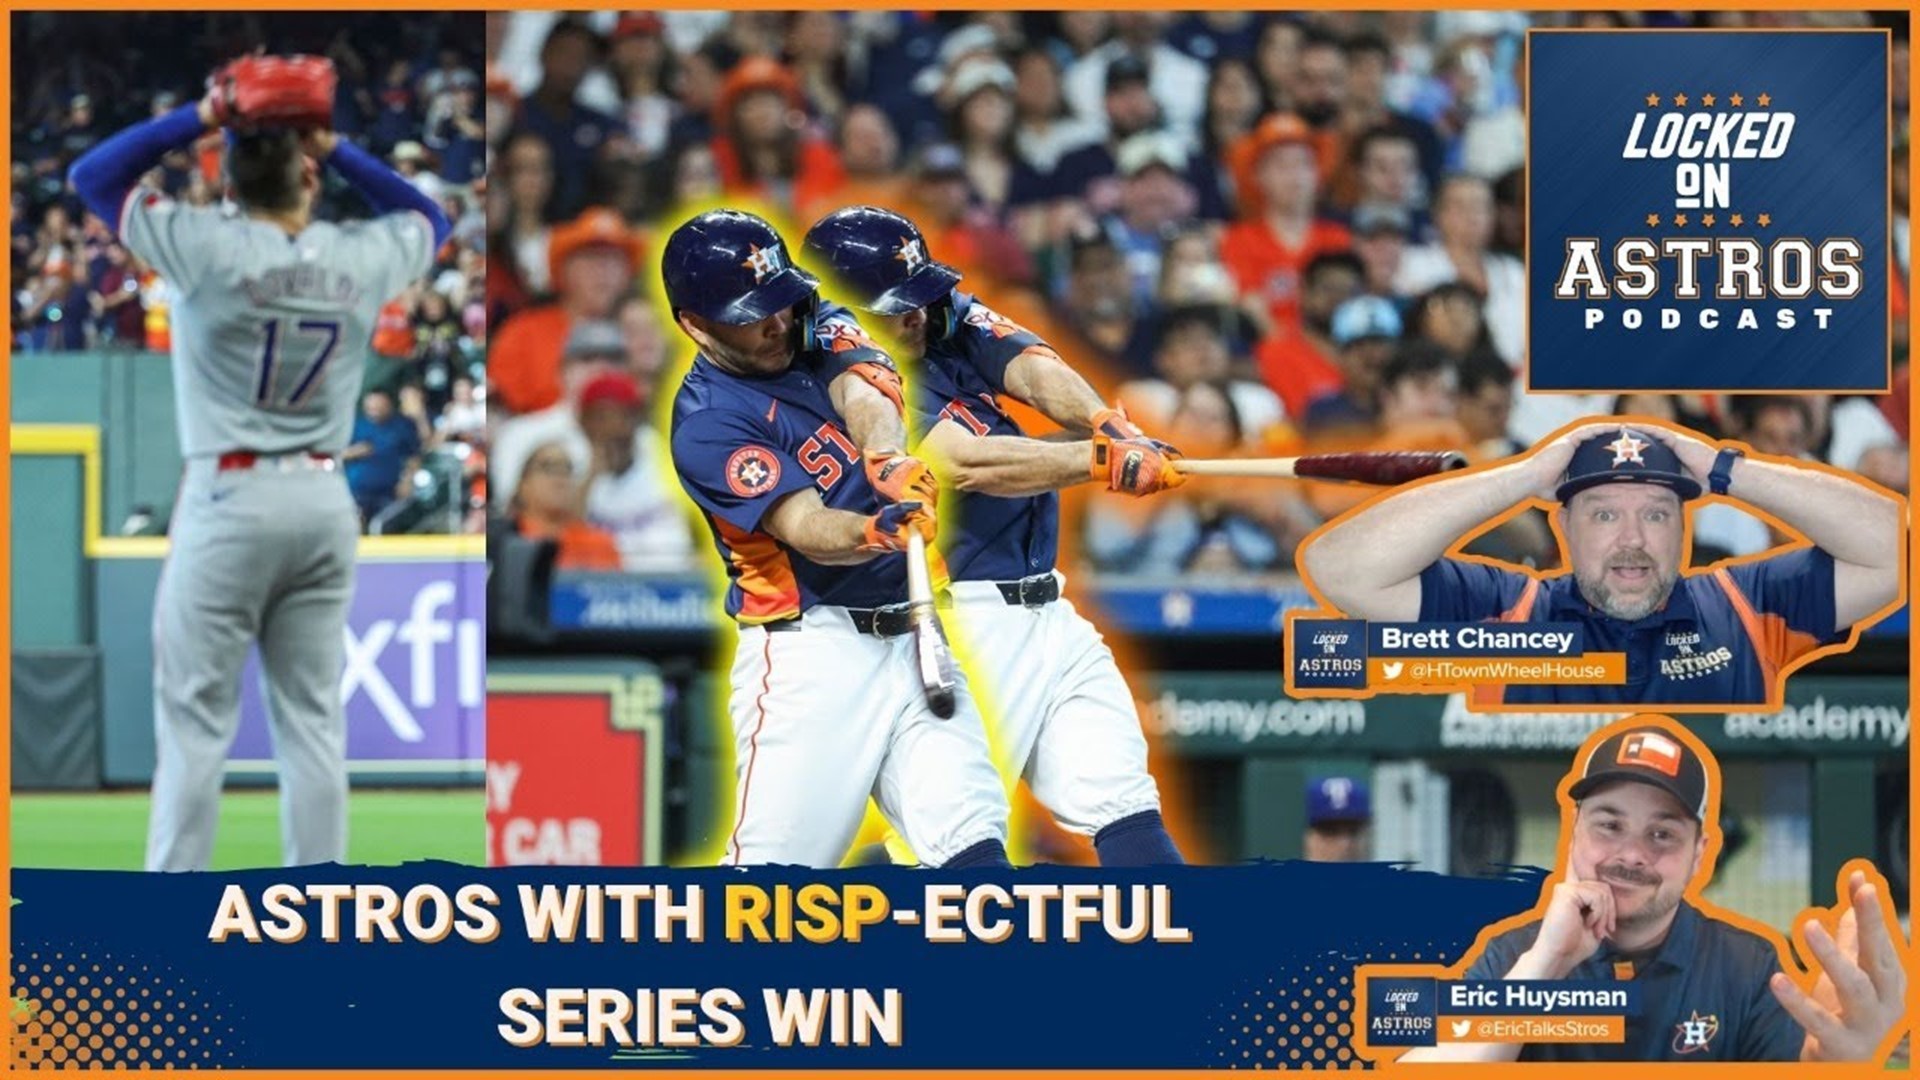 Astros win series at home behind Blanco and Javier